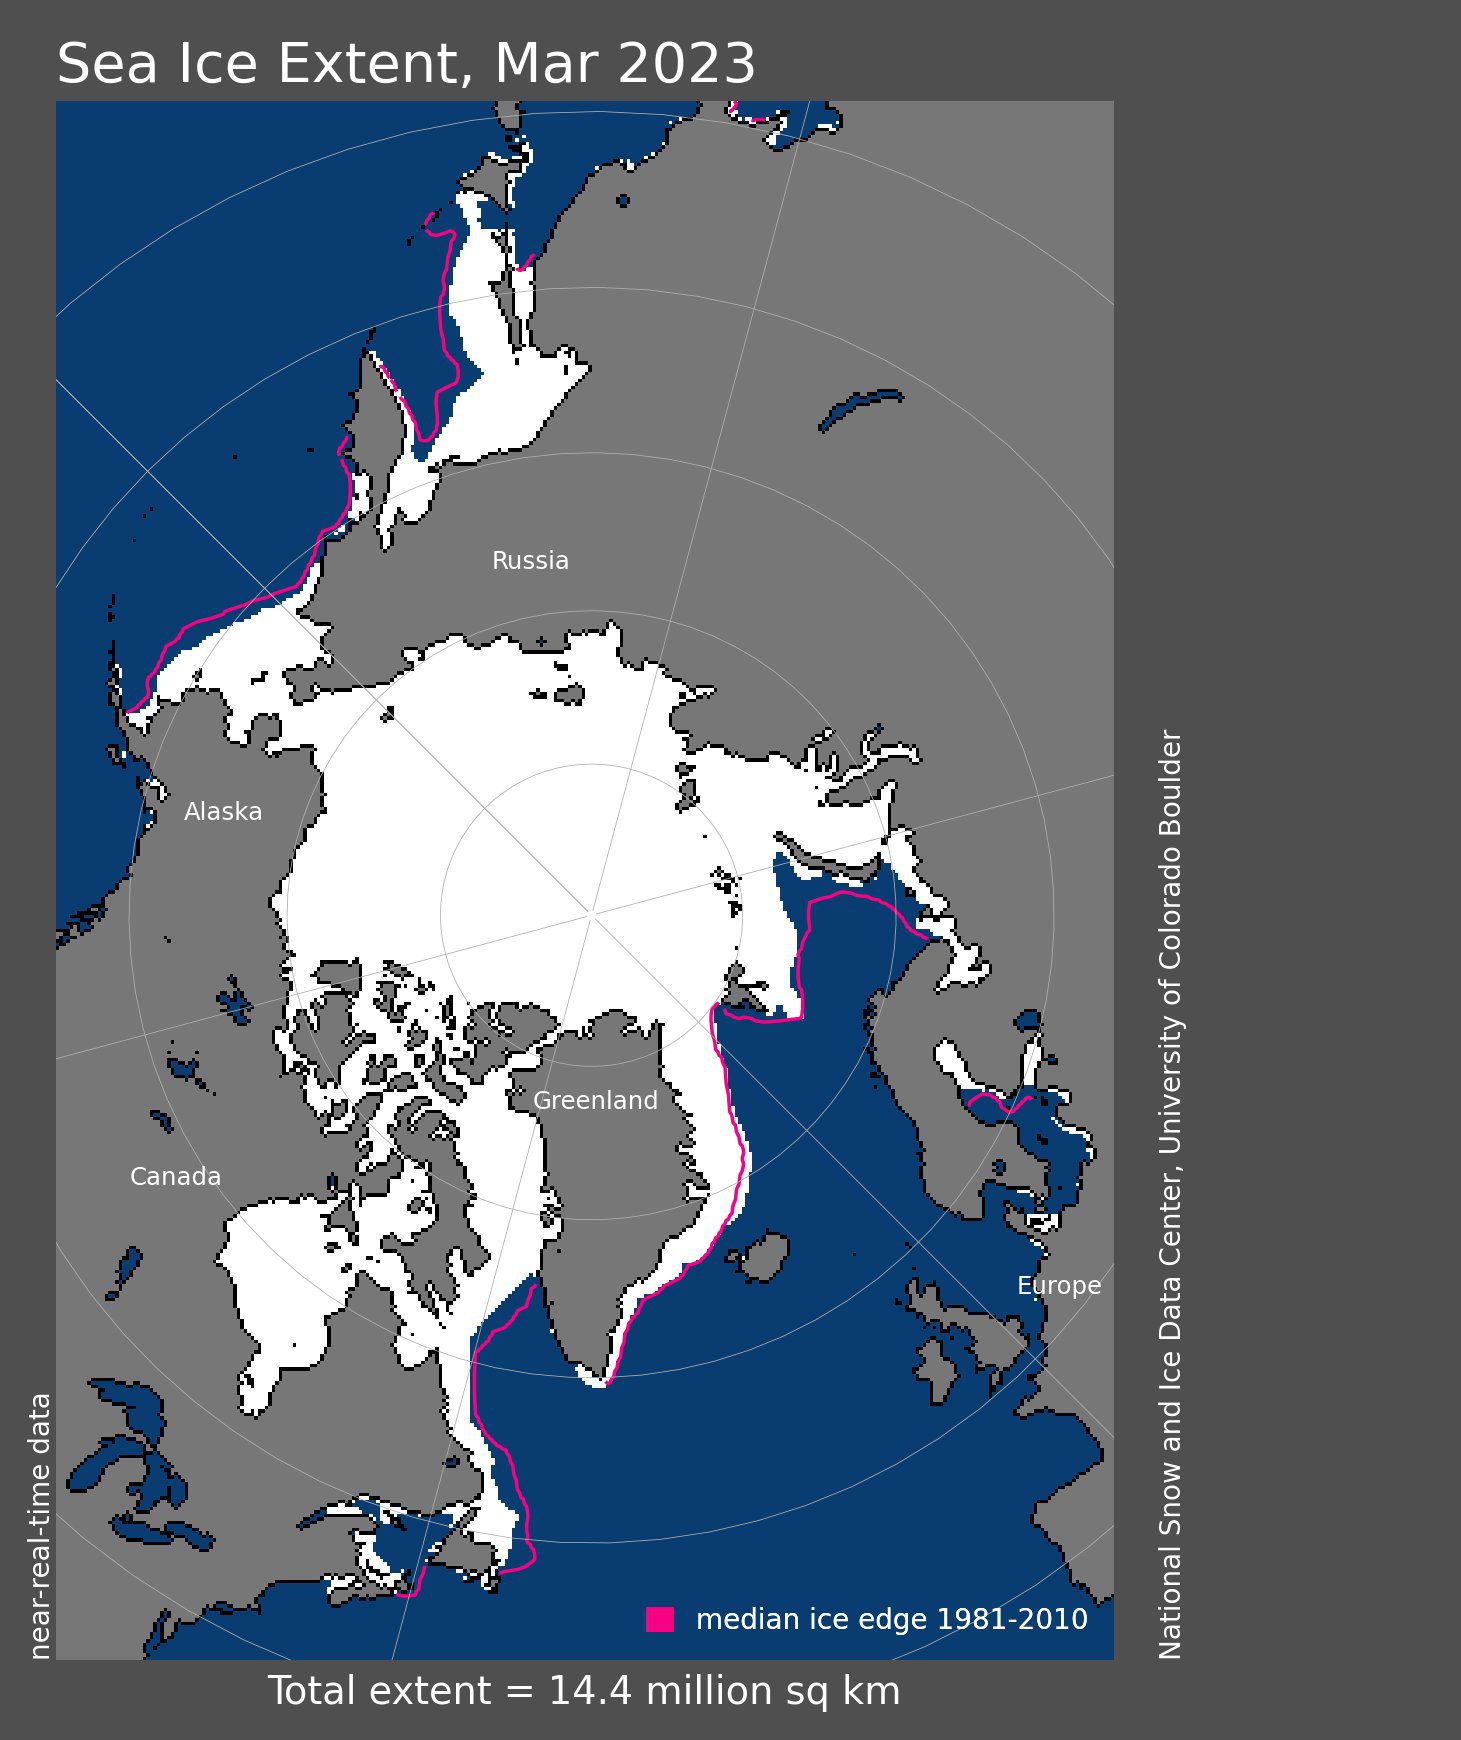 Polar sea ice extent reached an average of 5.58 million square miles.